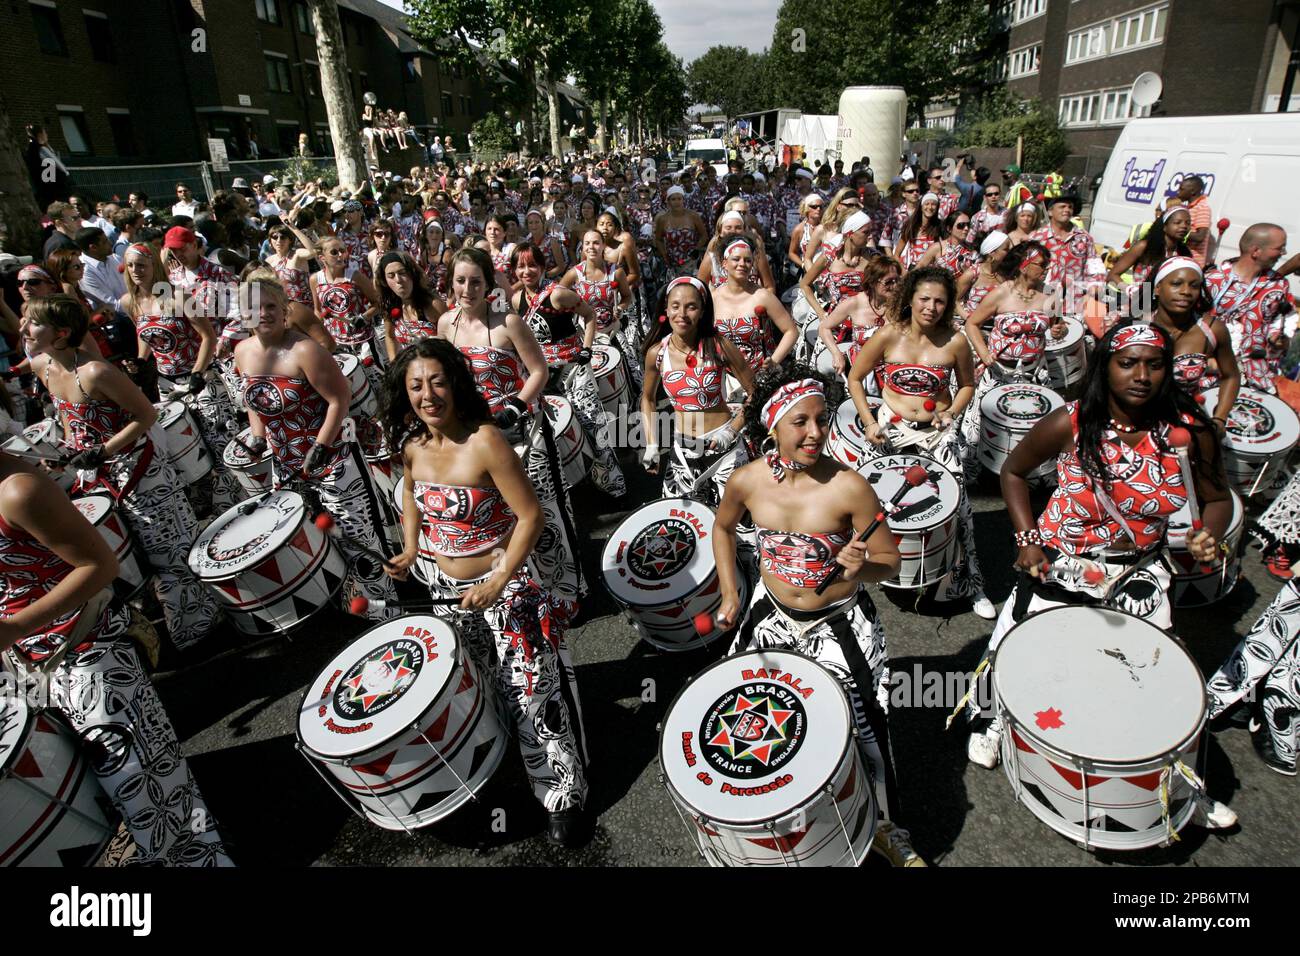 Participants in costumes play their drums and dance in formation as they  progress through the street during the Notting Hill Carnival, in London,  Monday Aug. 27, 2007. This year's theme, 'Set All